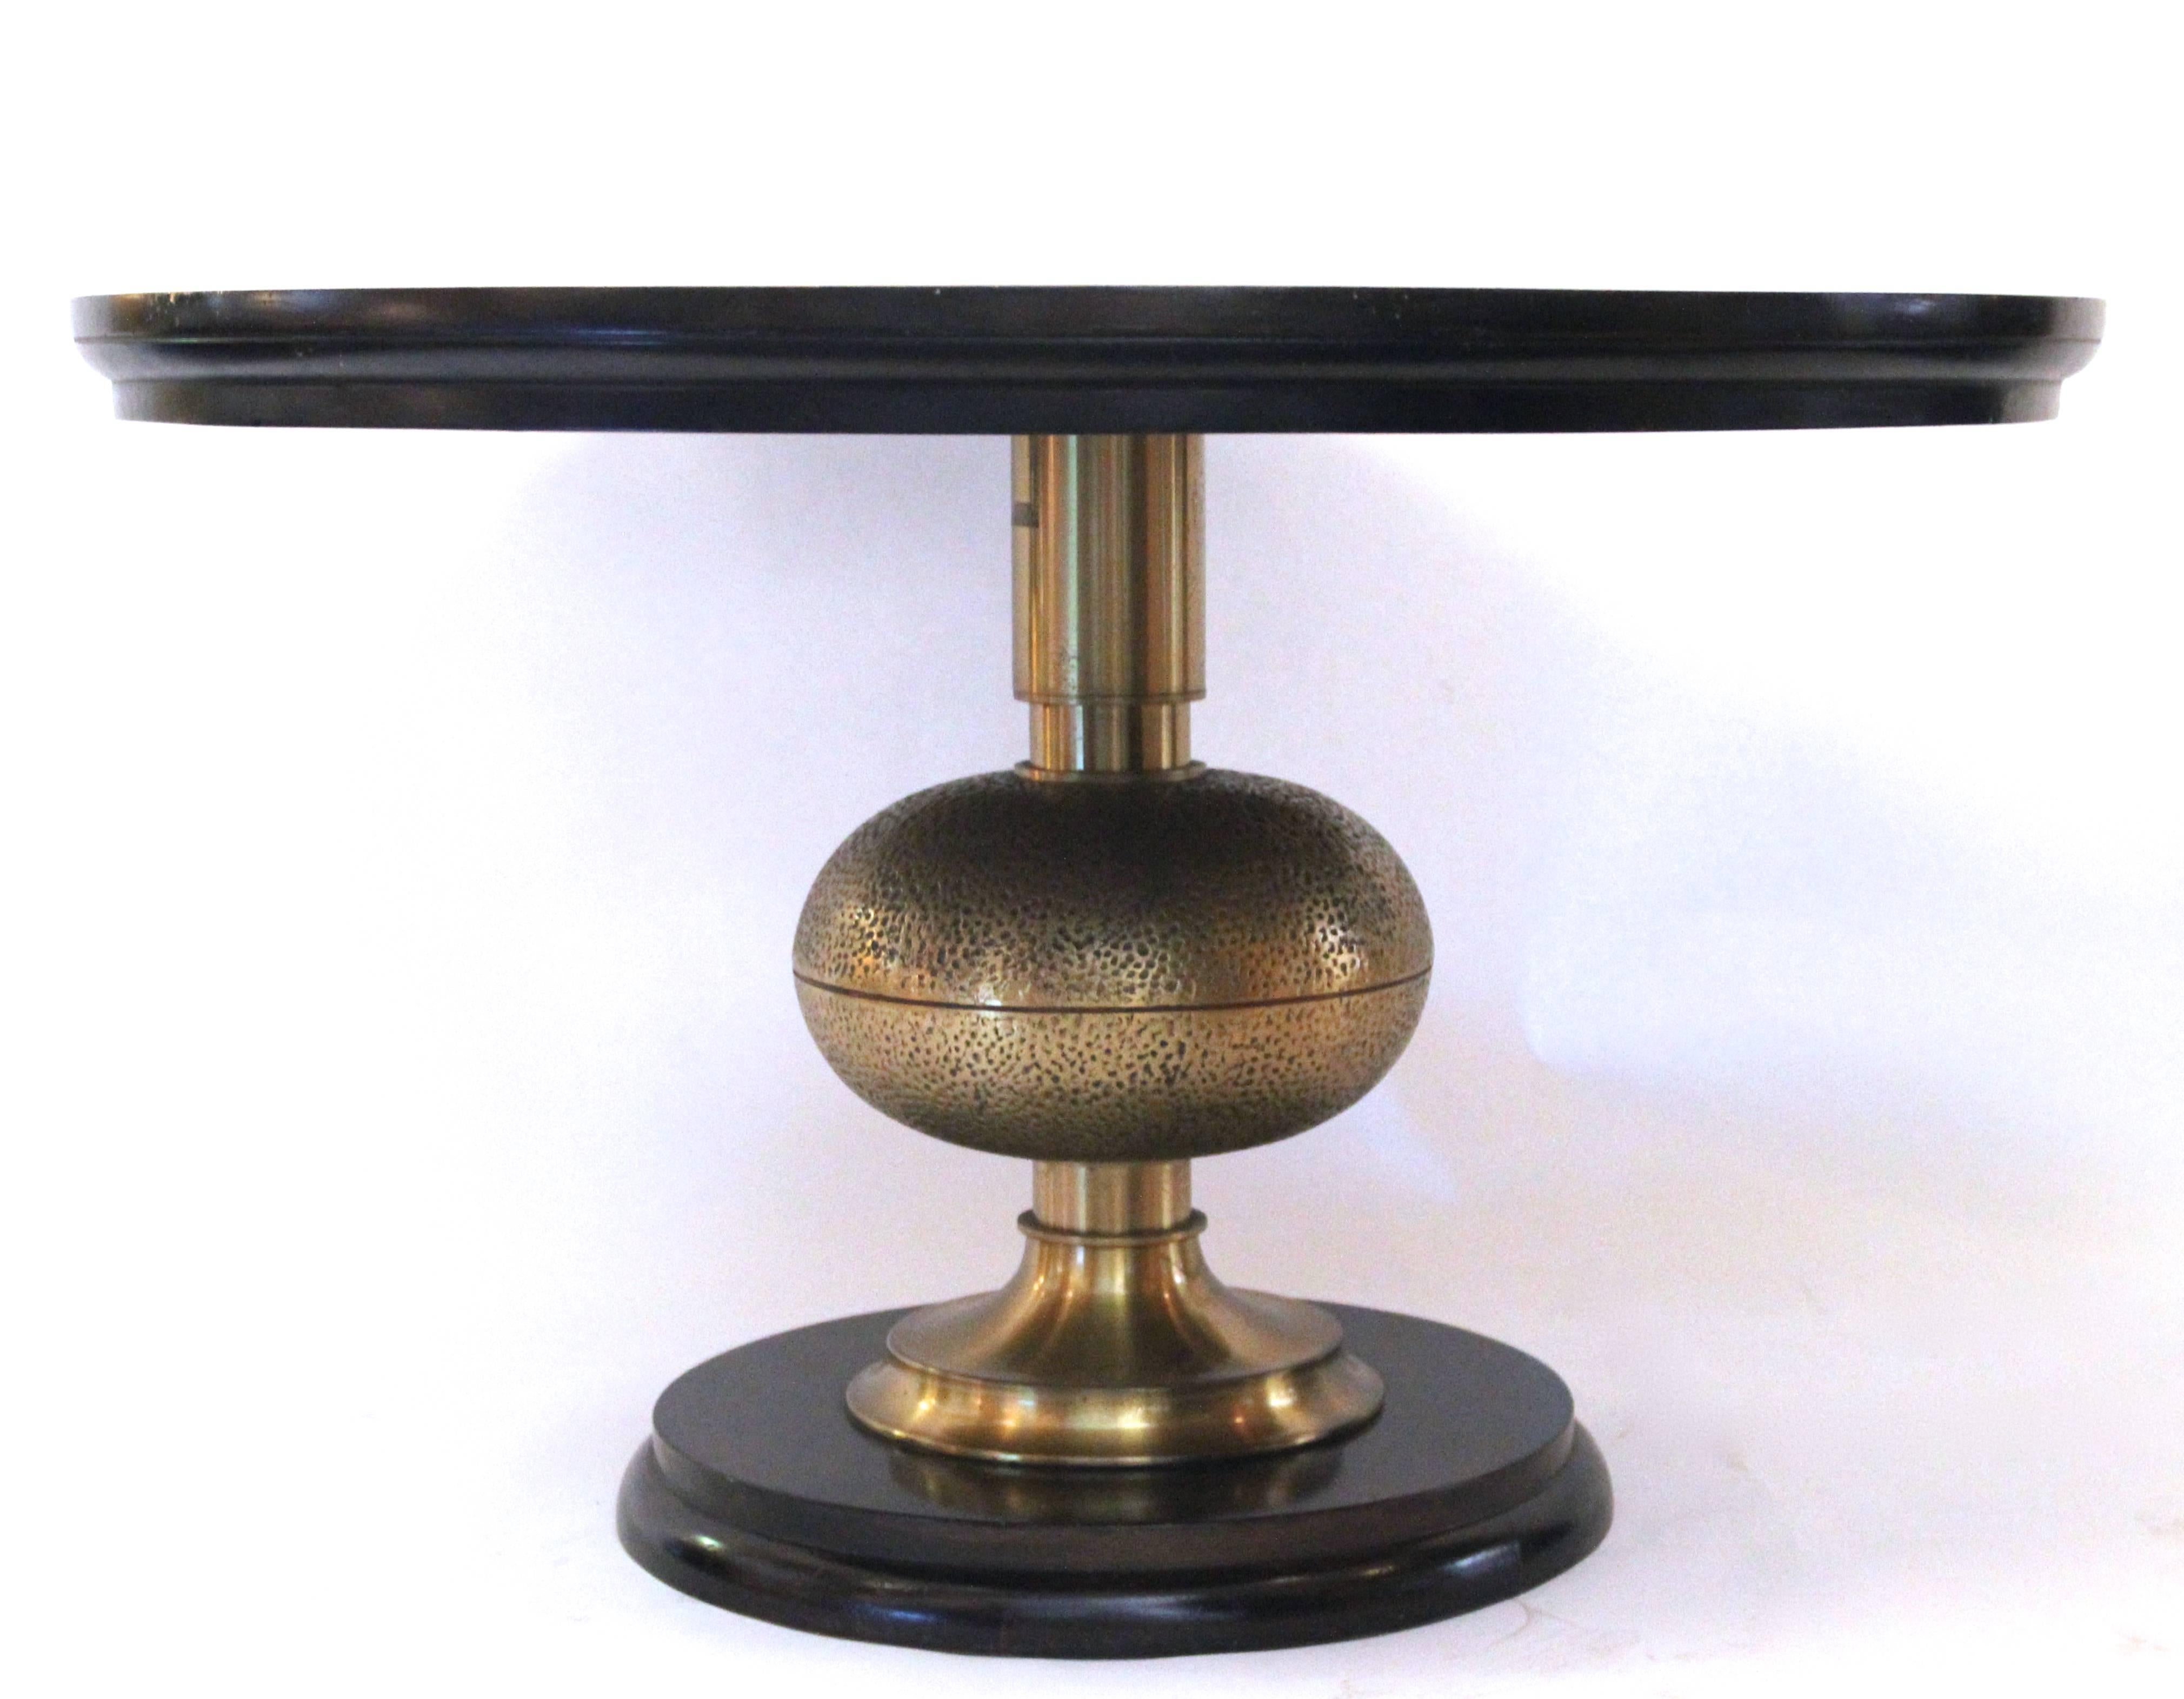 Luciano Frigerio gueridon,
mahogany and polished brass,
circa 1970, France.
Measures: Height 74 cm, diameter 119 cm.